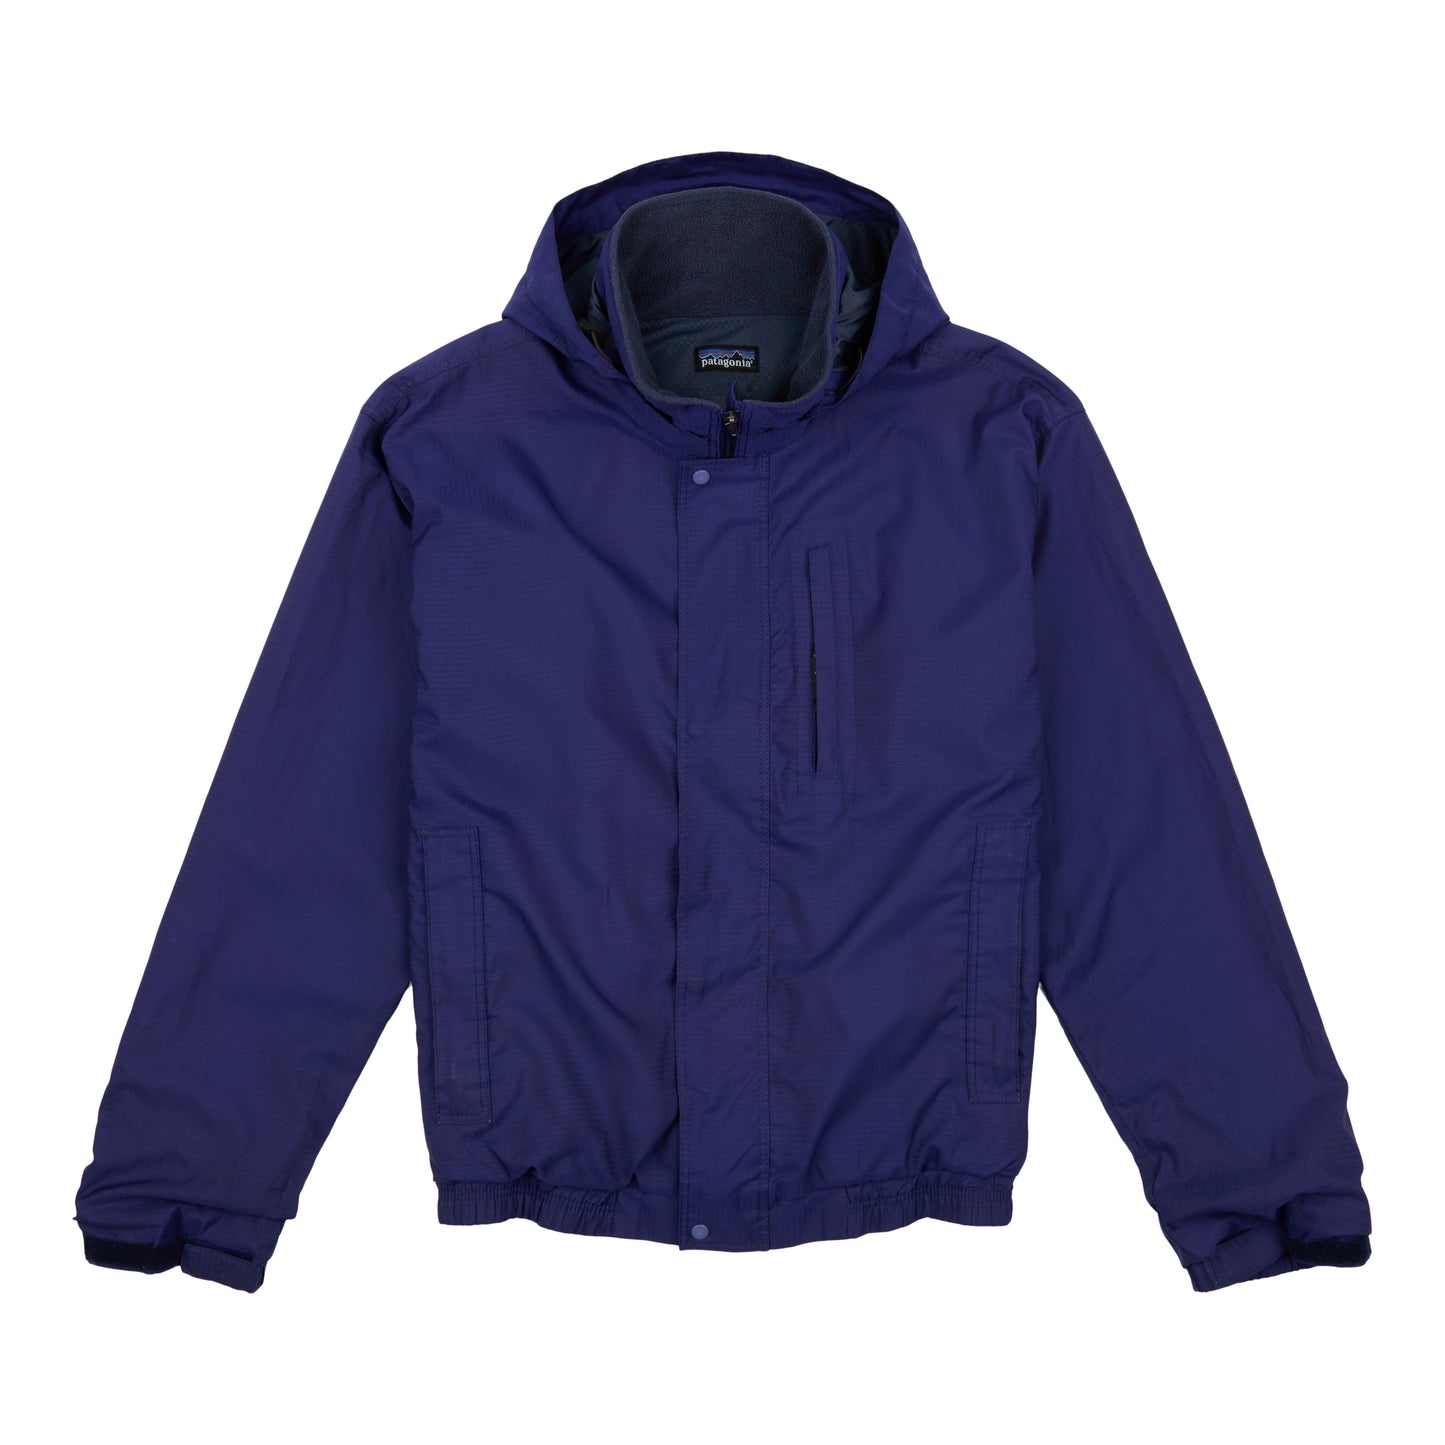 New Patagonia Ascensionist GTX Jacket size large royal blue